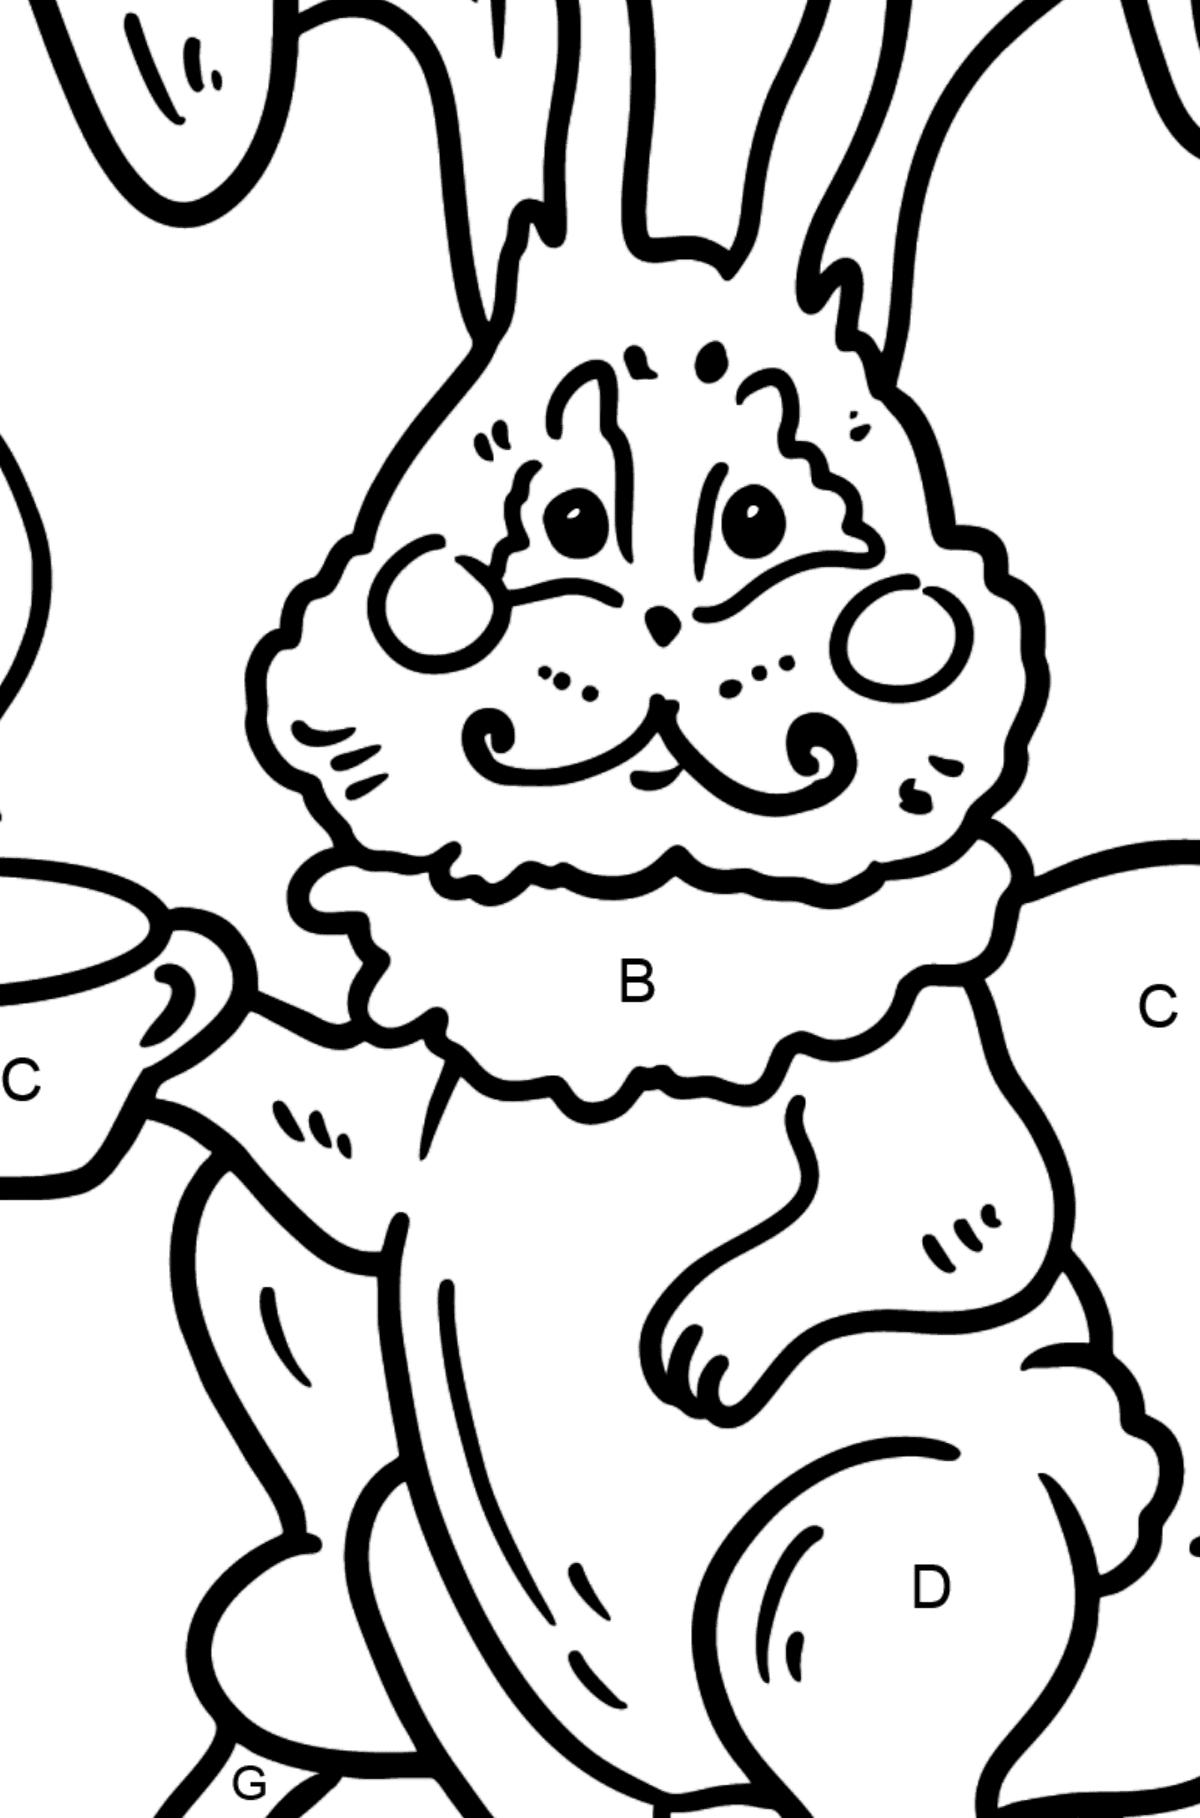 Bunny Sitting coloring page - Coloring by Letters for Kids